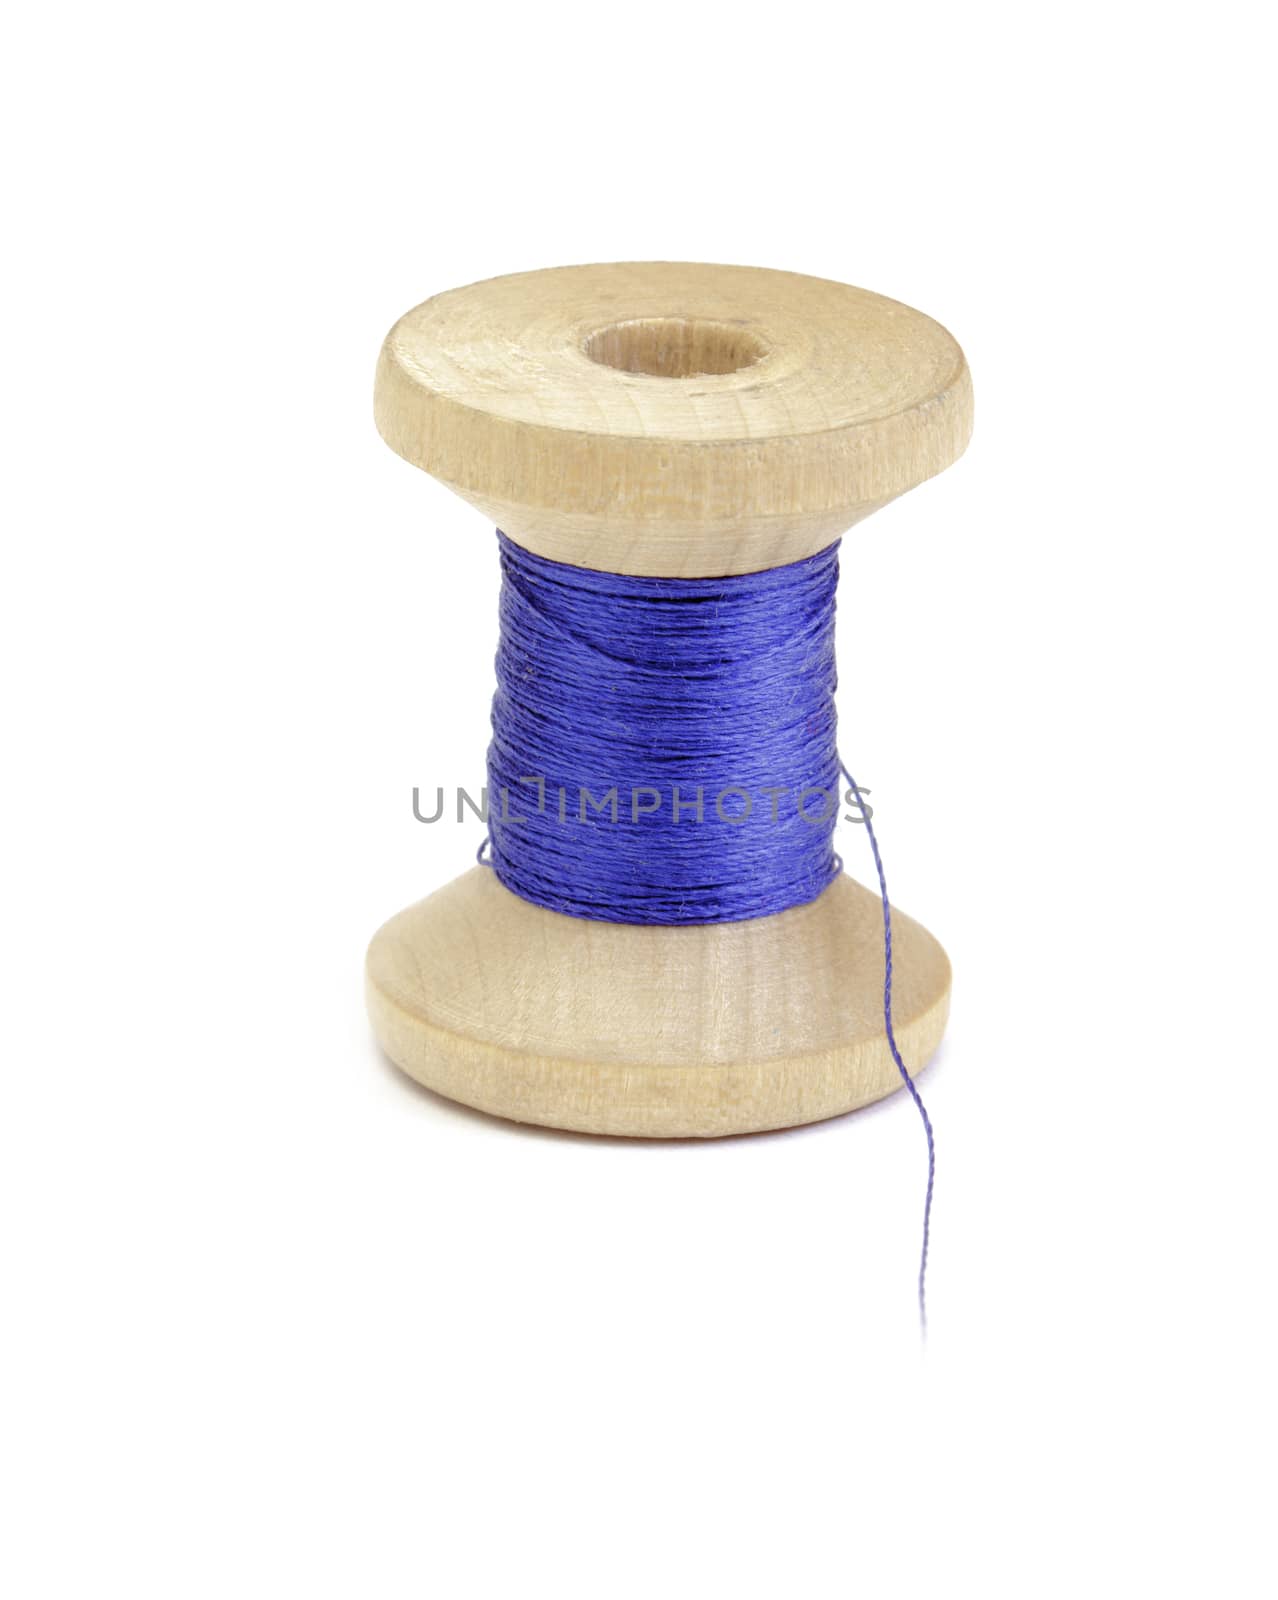 Spool of thread on white background